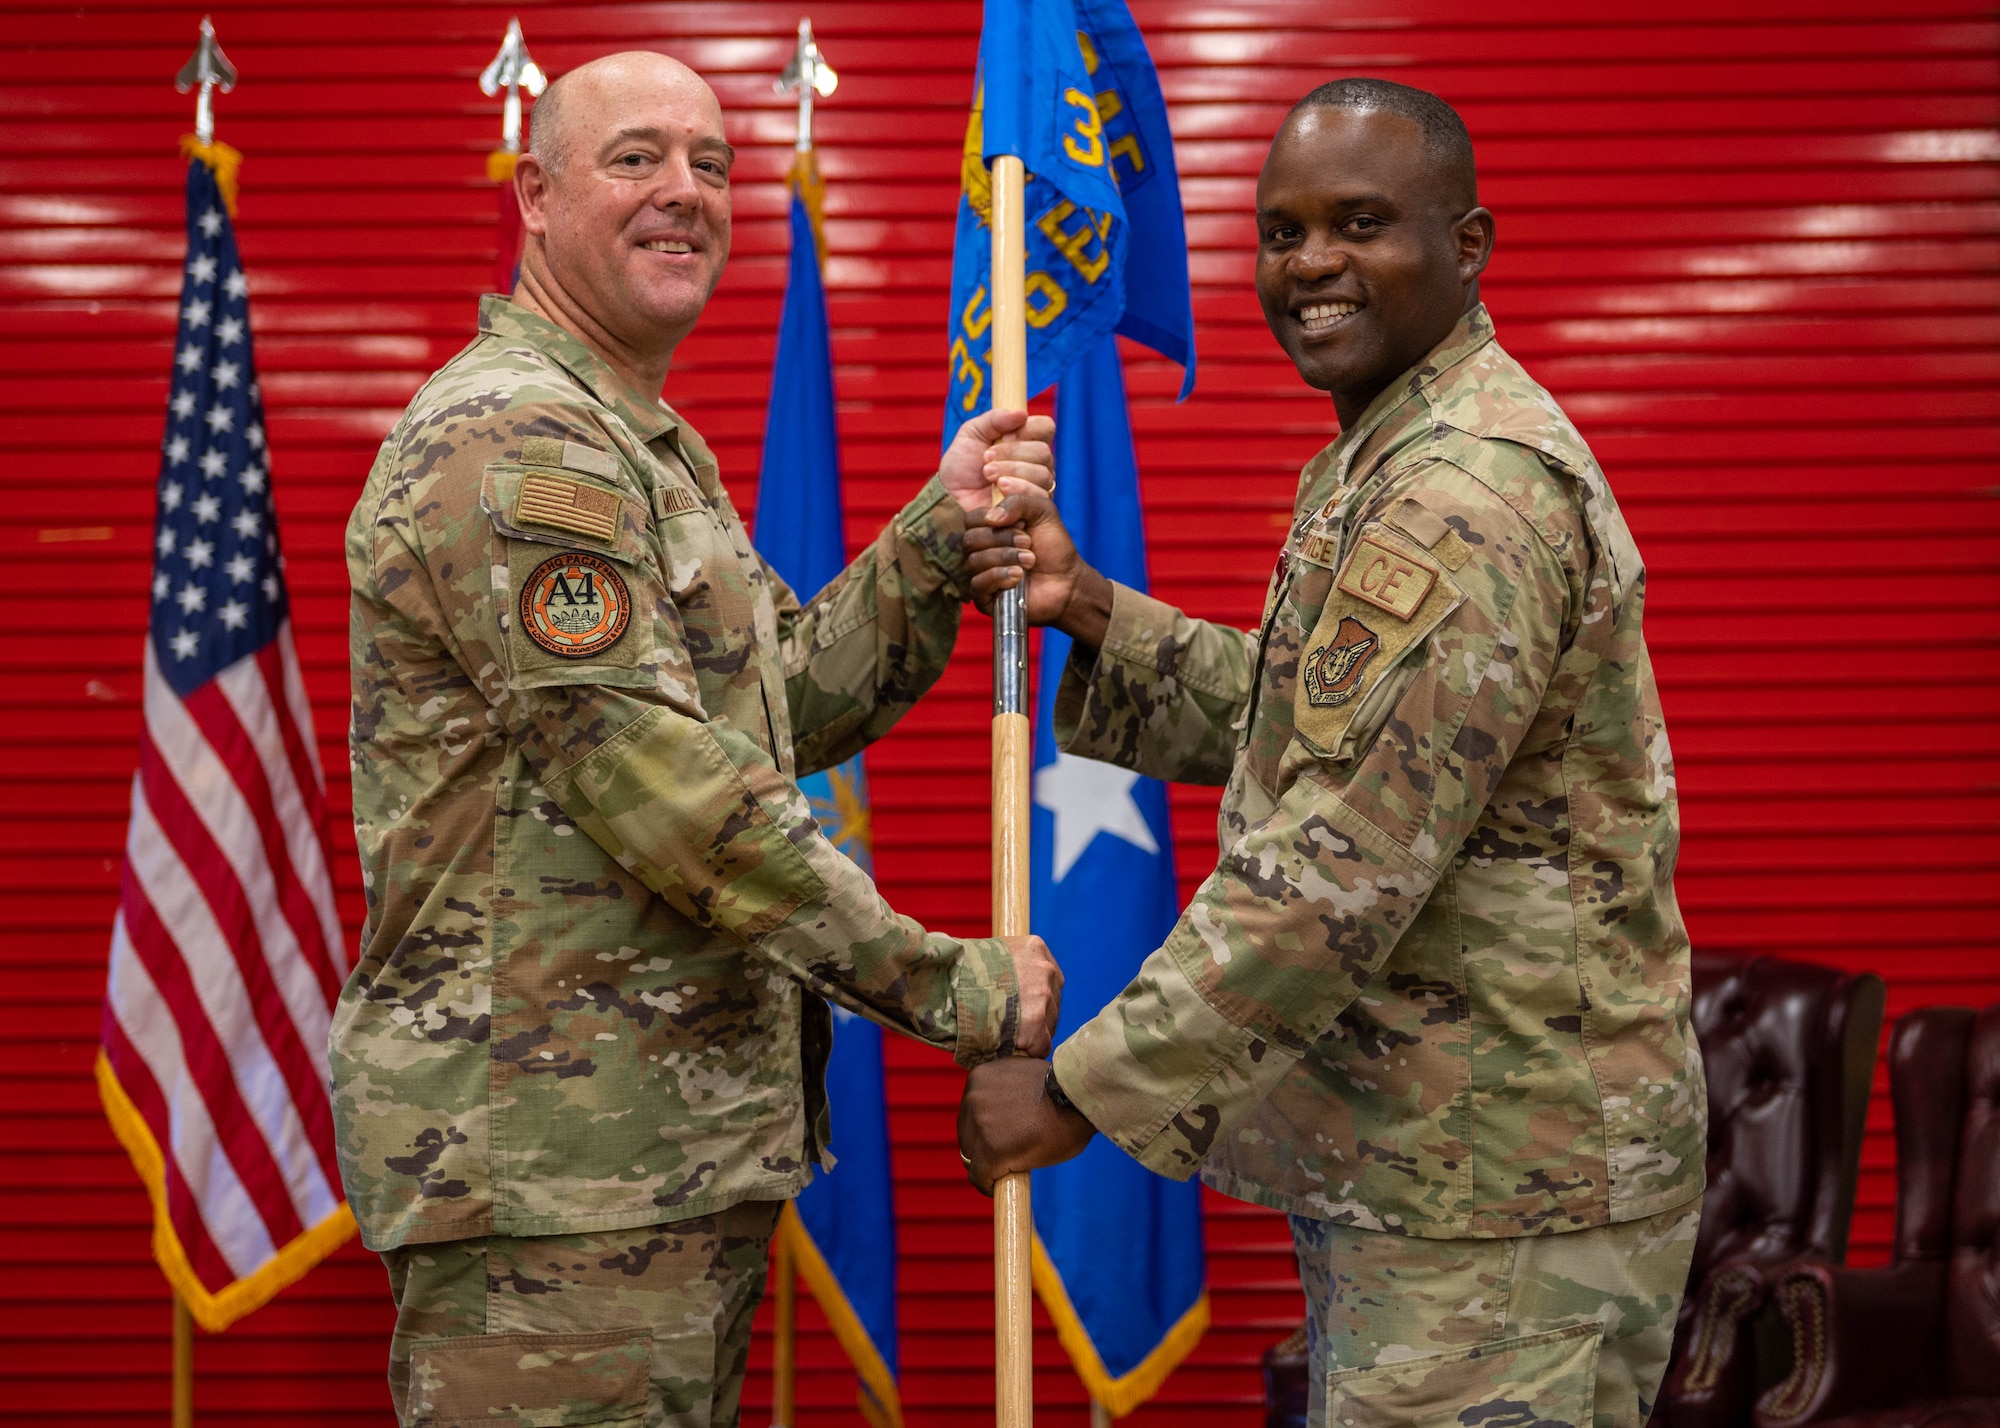 U.S. Air Force Col. Kenneth Joseph gives the guidon to Brig. Gen. Patrick G. Miller, director of logistics, engineering and force protection, headquarters Pacific Air Forces, Joint Base Pearl Harbor Hickam, Hawaii, at the Pacific Regional Training Center - Andersen, Guam, Oct. 20, 2023. Joseph held the position of commander for the past two years. (U.S. Air Force photo by Airman Allon Lapaix)